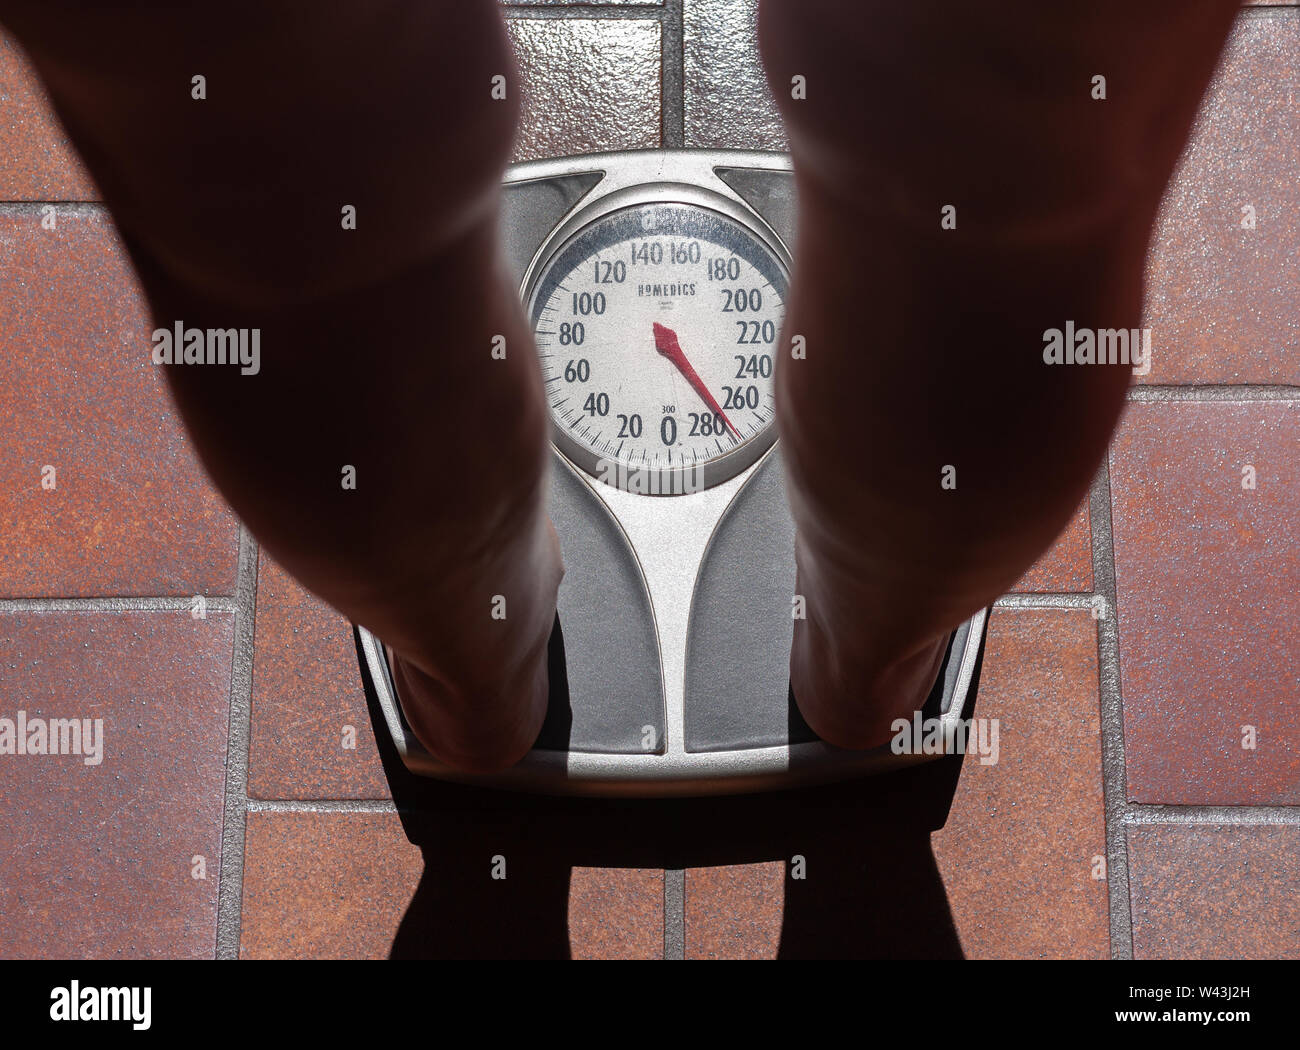 View of an overweight persons feet weighting themselves on a bathroom scale. Stock Photo